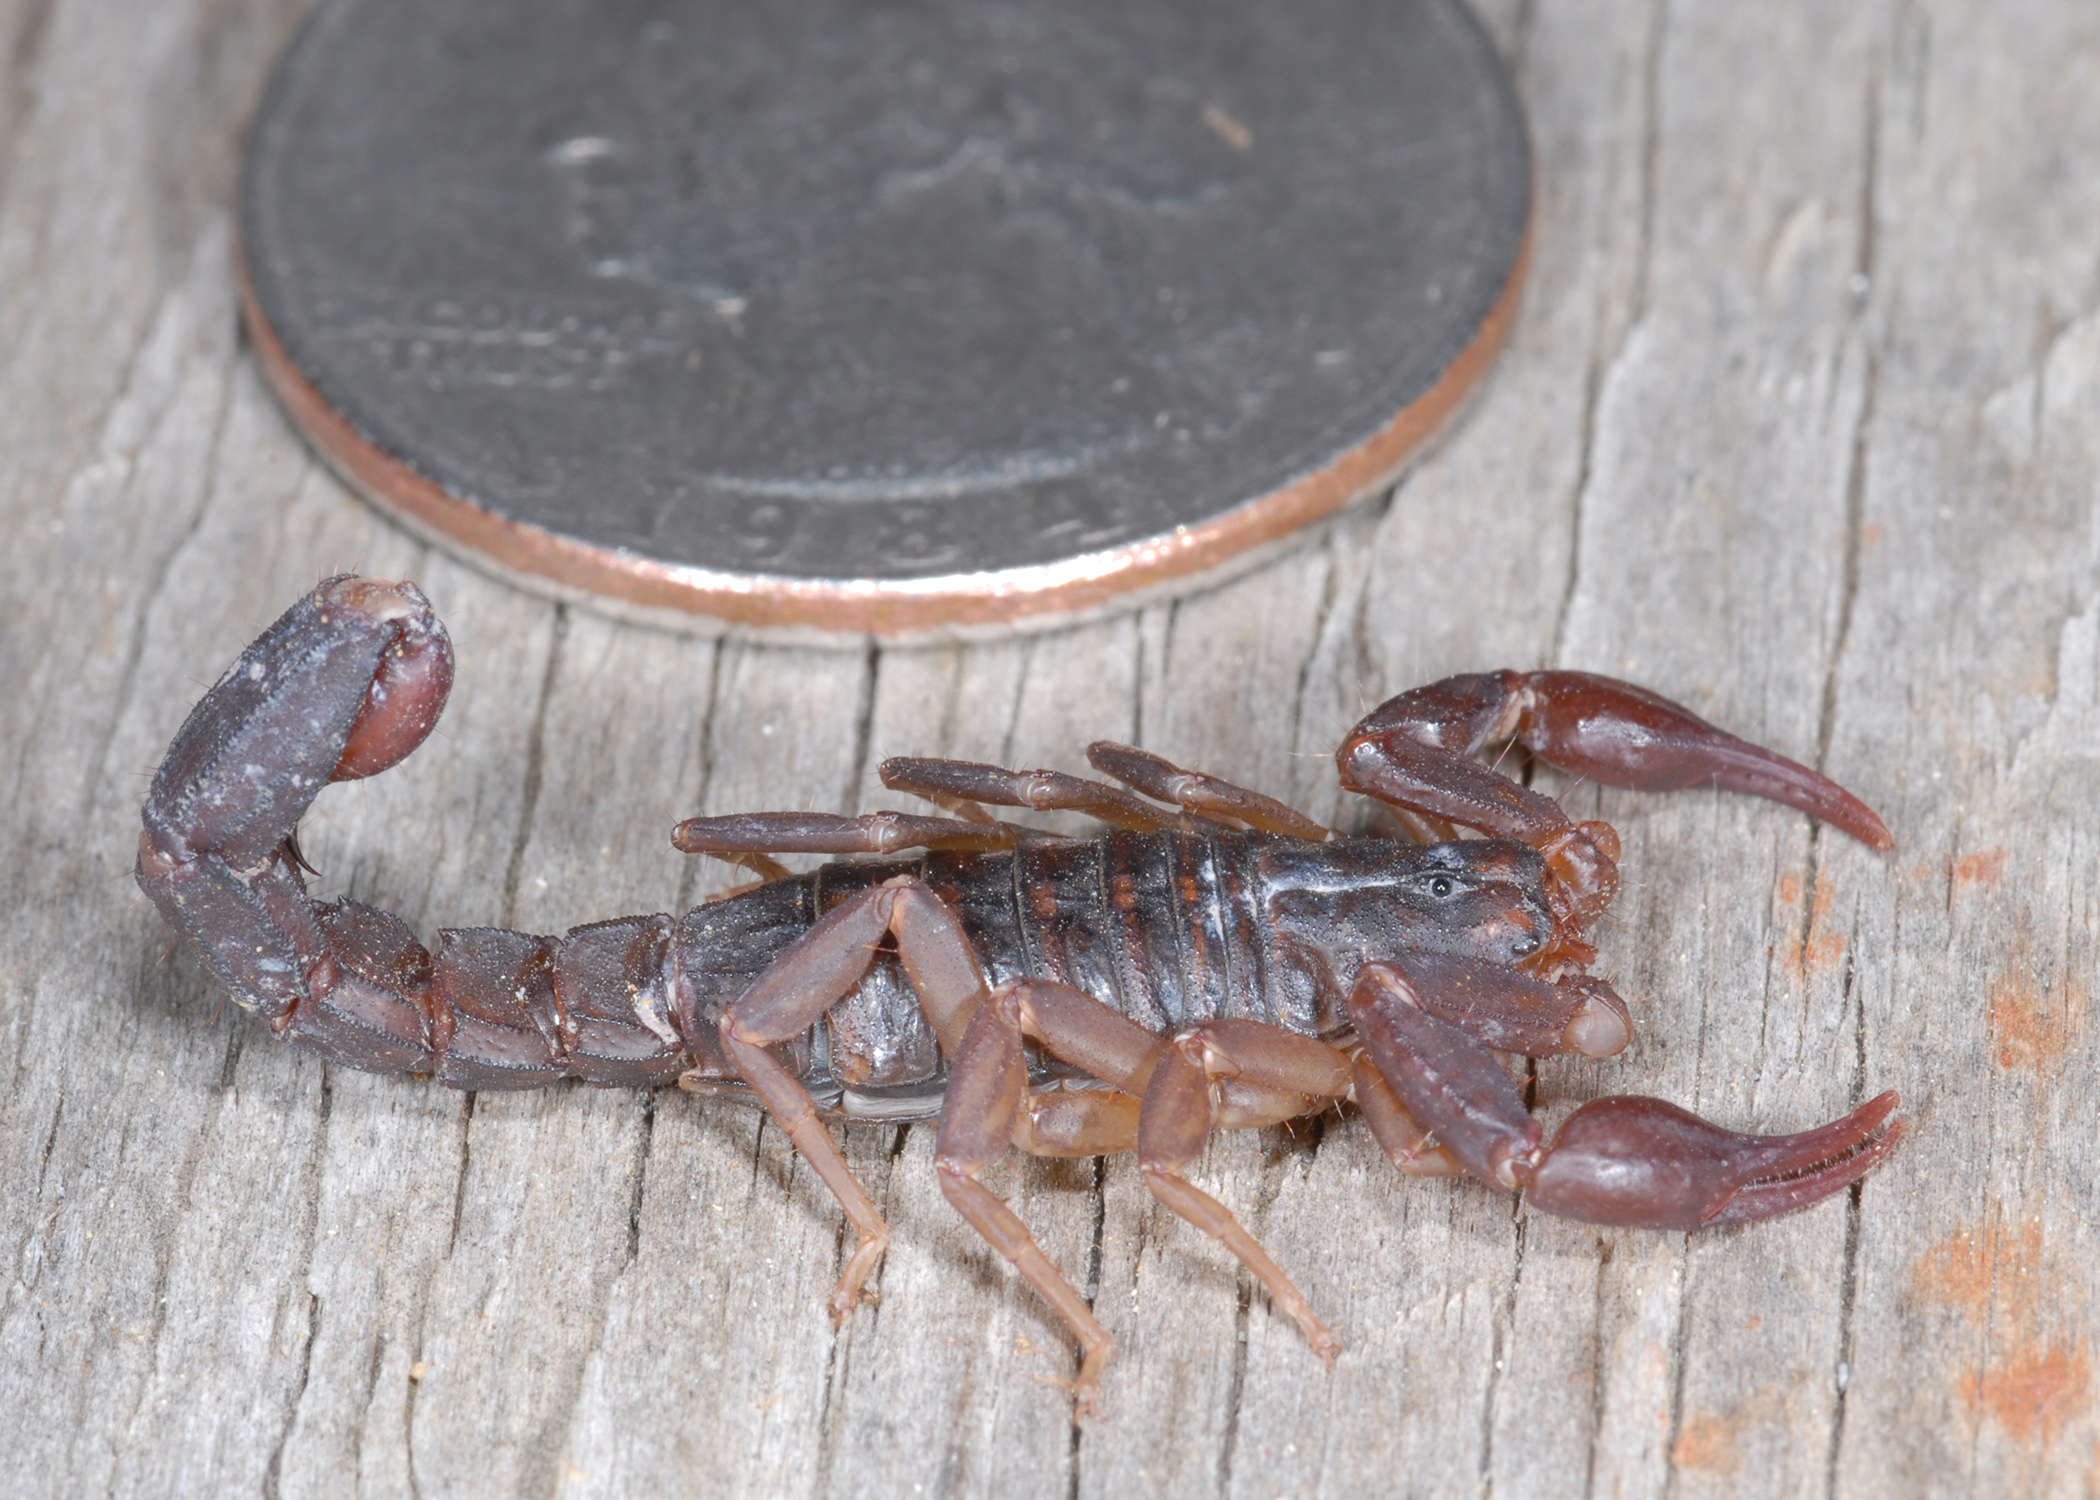 Scorpions in the Southwest United States - PestWorld